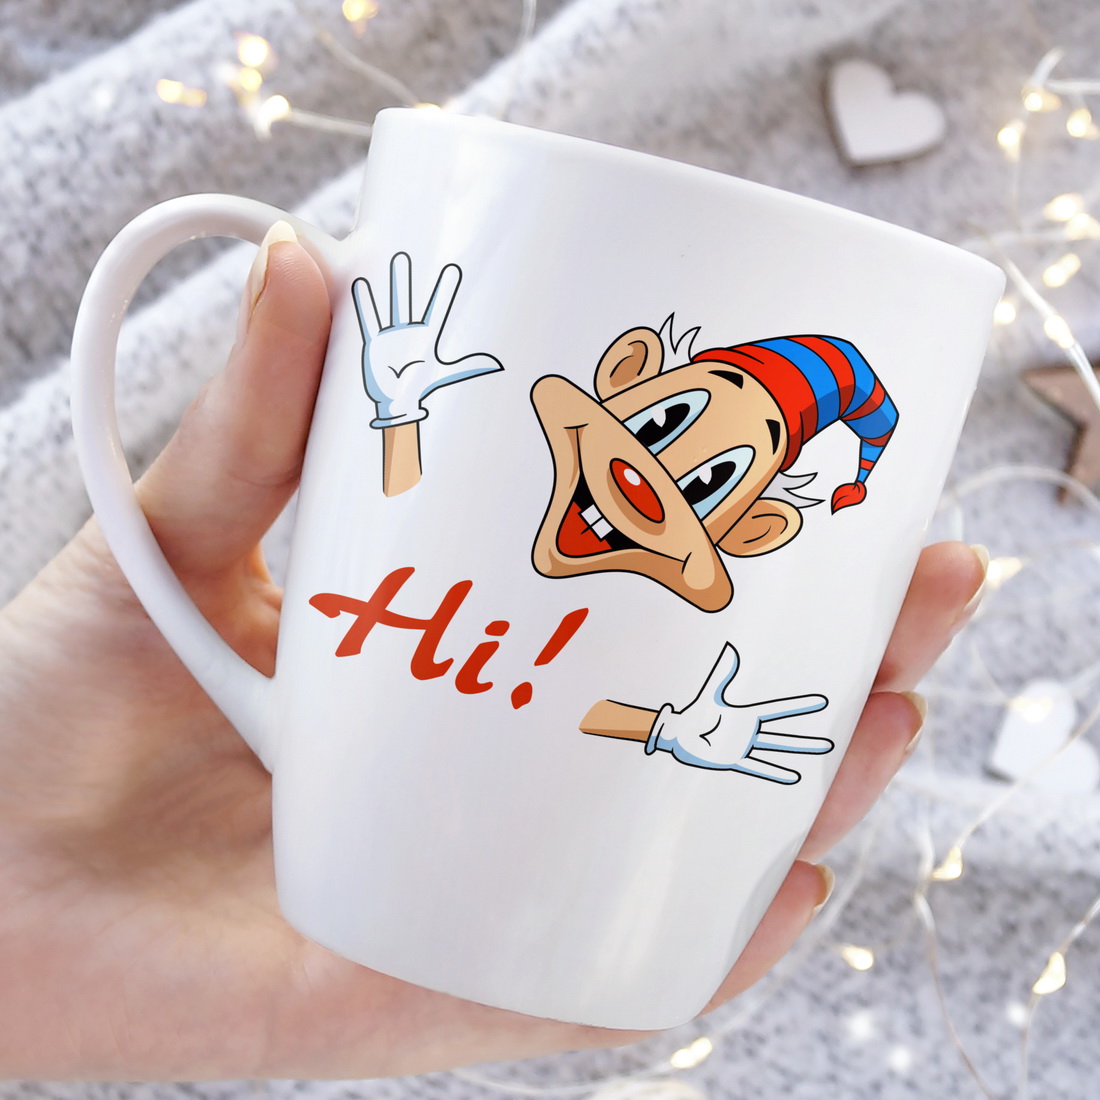 Person holding a coffee mug with a cartoon character on it.